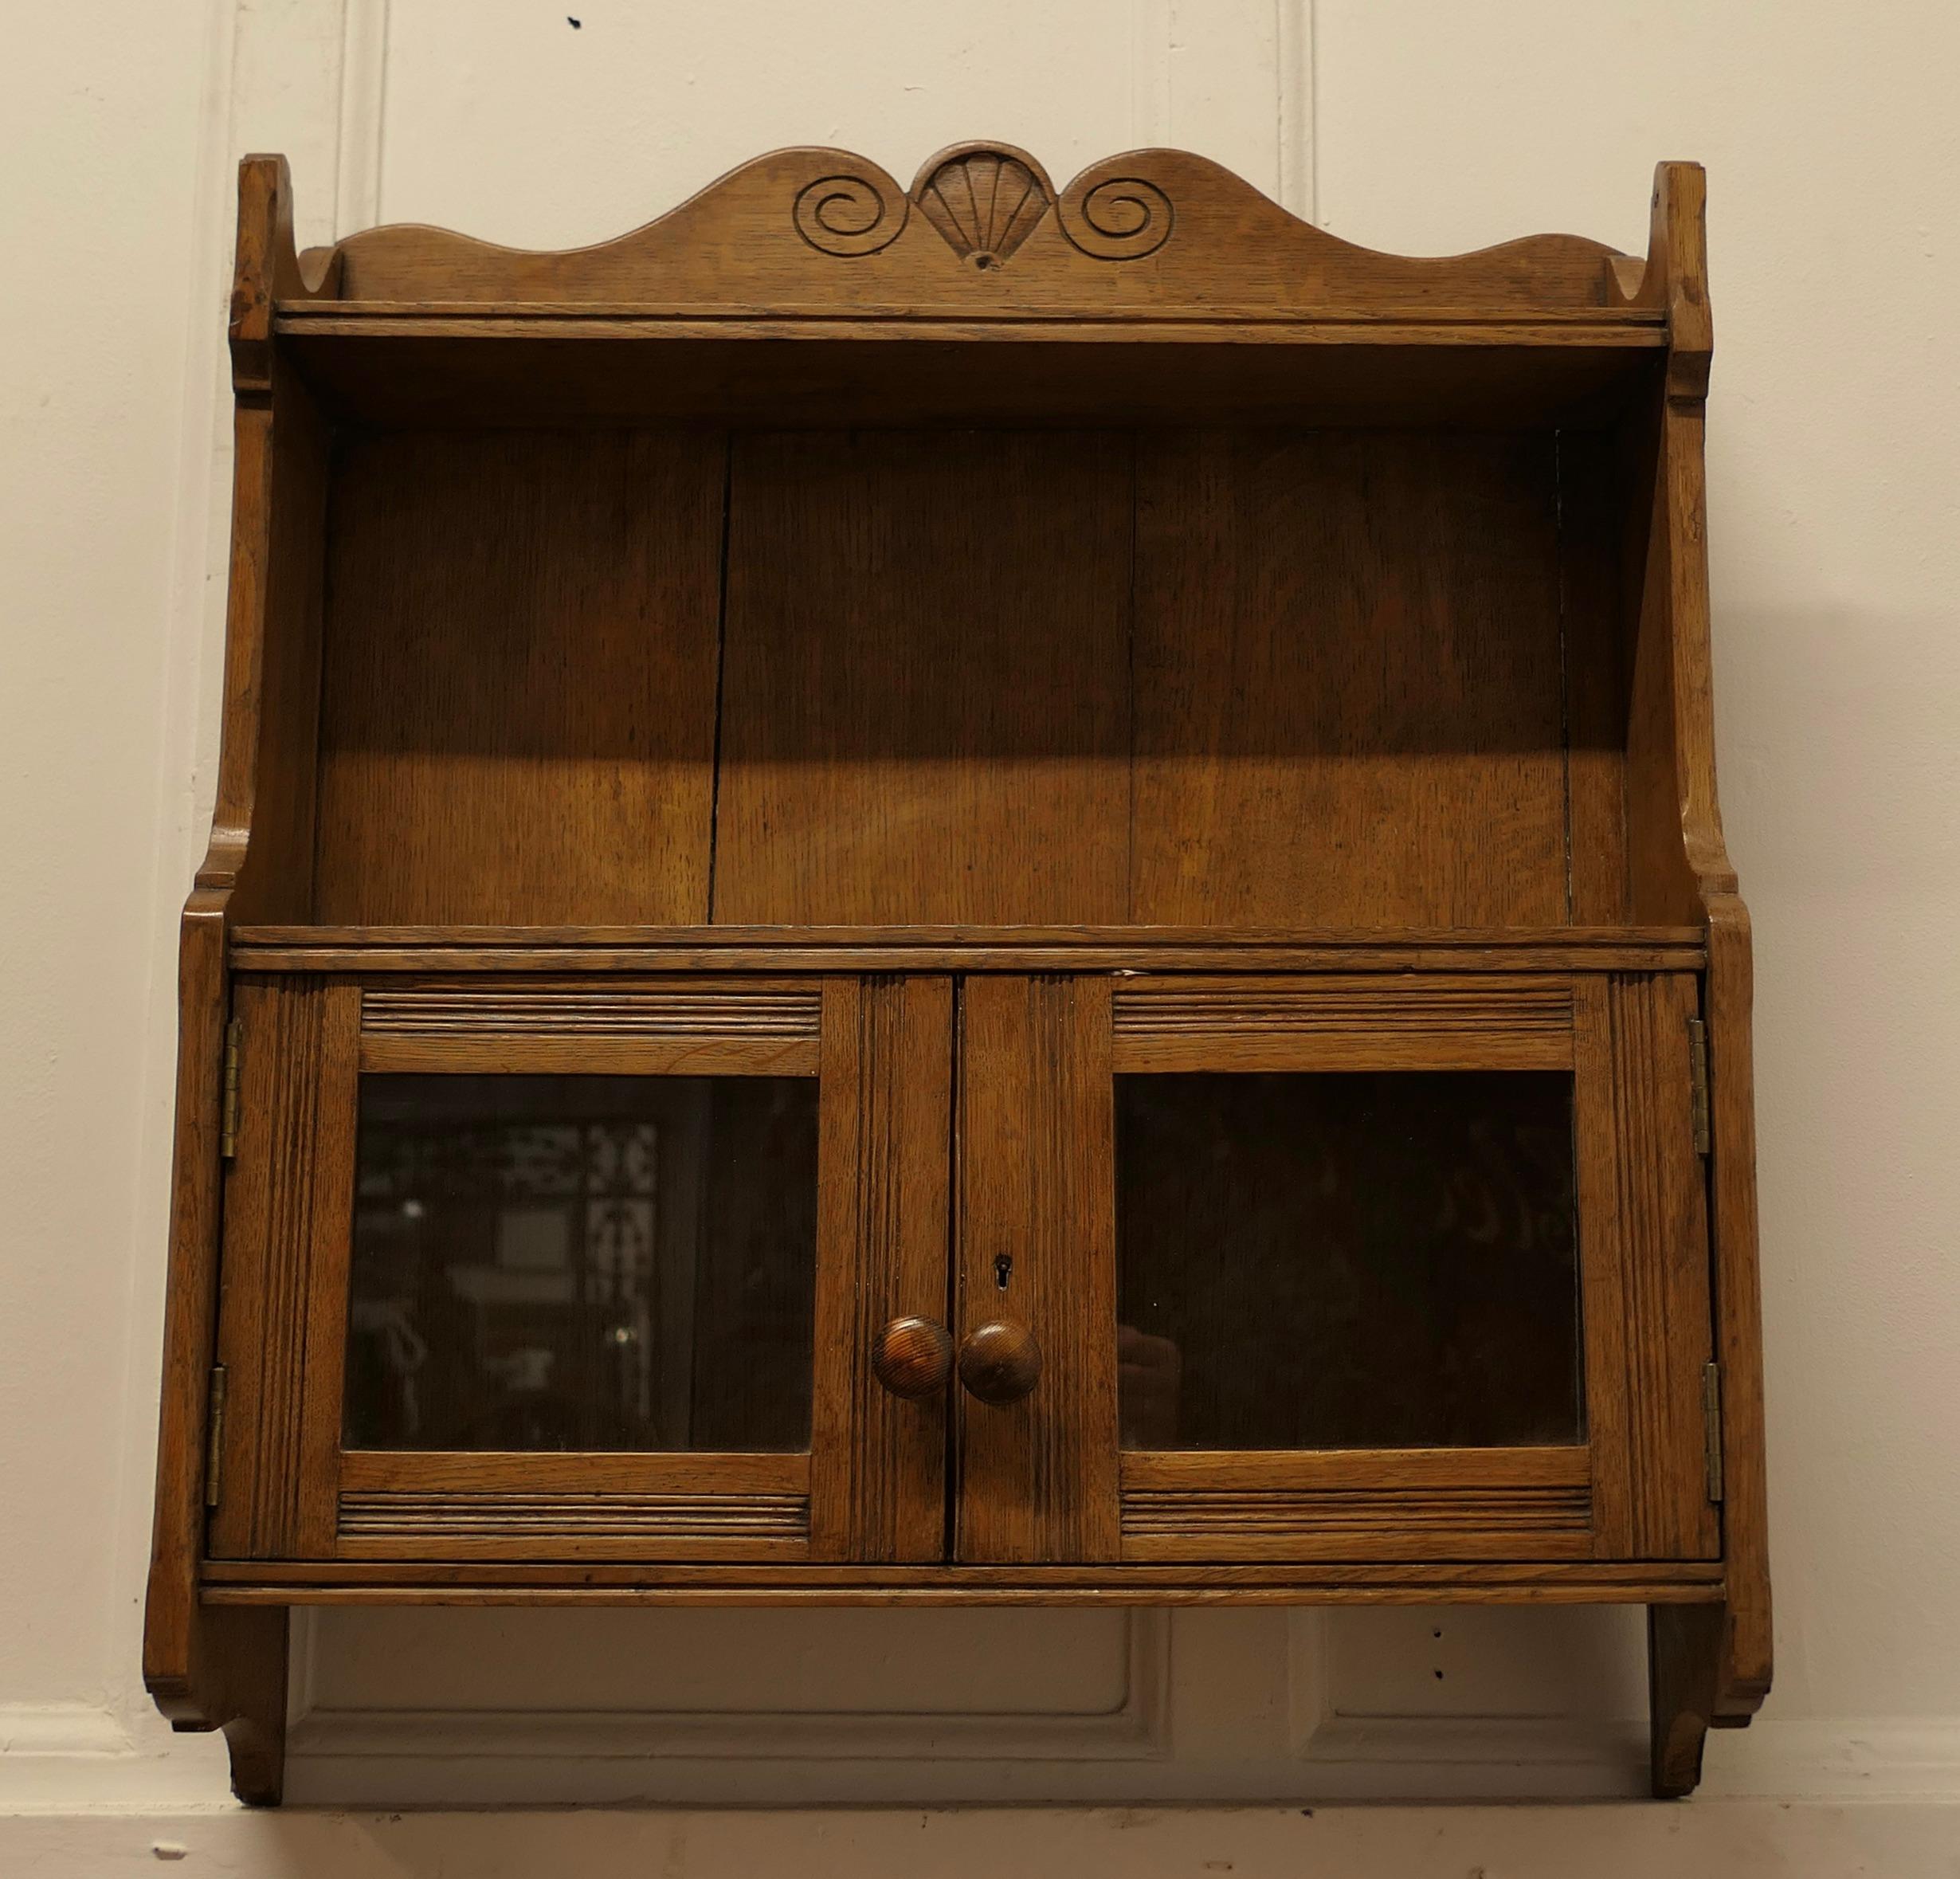 Edwardian Oak Wall Cabinet

A great little piece, made in blonde Oak with a delicate carving to the top  galleried shelf and around the twin glazed doors  
The interior of the cabinet has some tiny water stains otherwise a perfect piece, just the